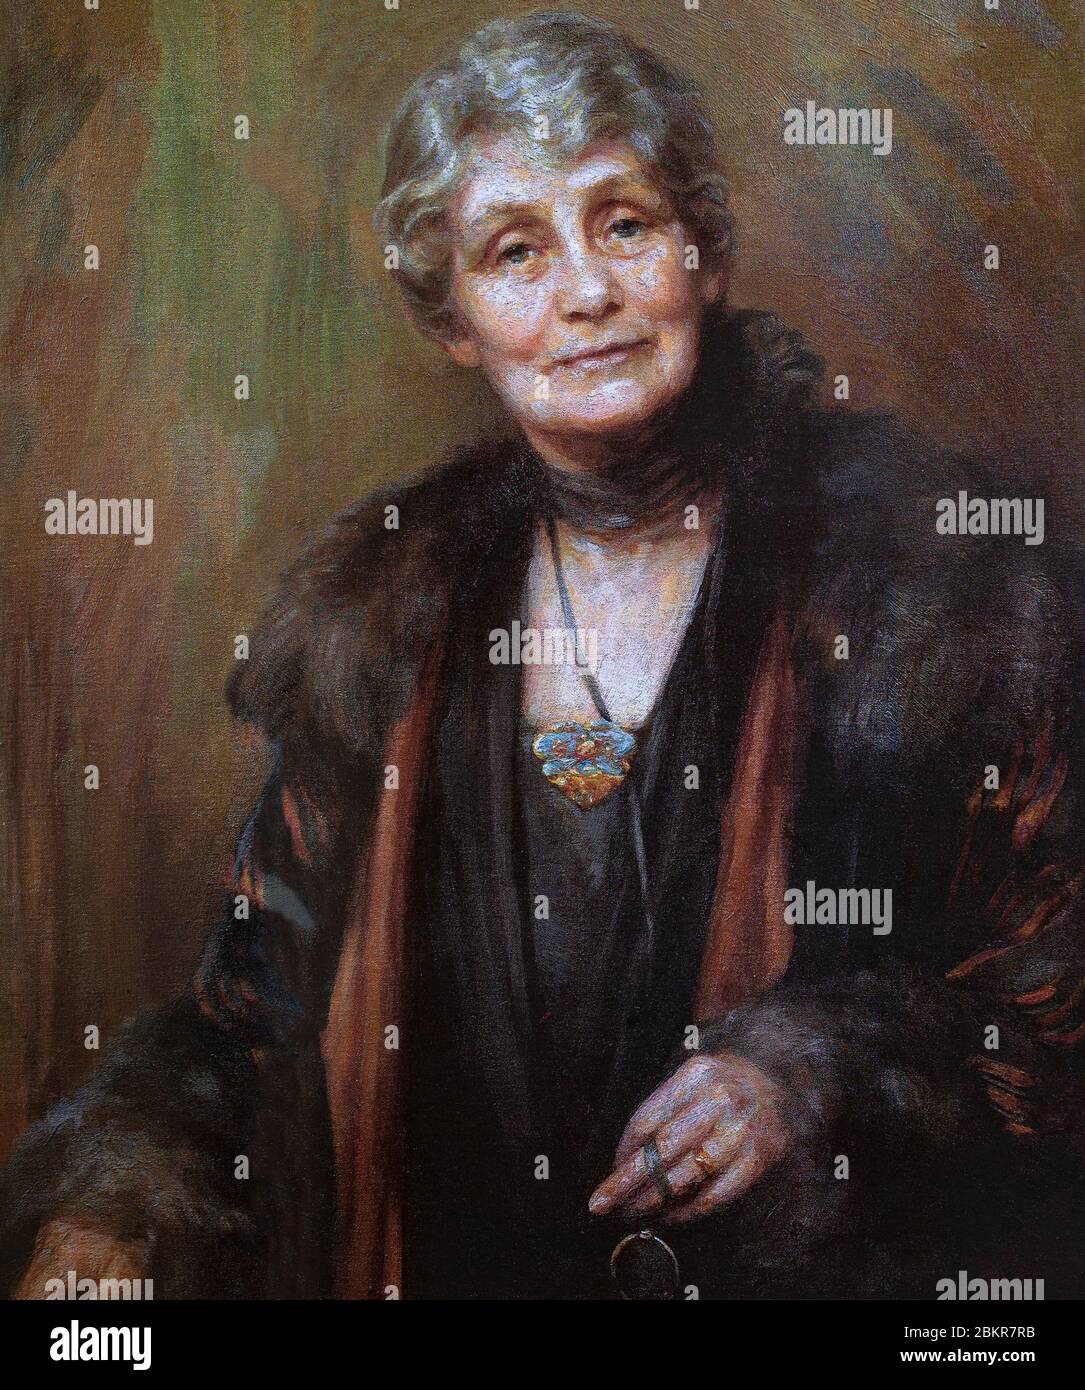 A portrait of Emmeline Pankhurst (1858-1928), the British political activist best remembered for organizing the UK suffragette movement and helping women win the right to vote. Painting by Georgina Agnes Brackenbury (1865–1949),  a British painter who was known as a militant suffragette and jailed for demonstrating for women's rights. Stock Photo